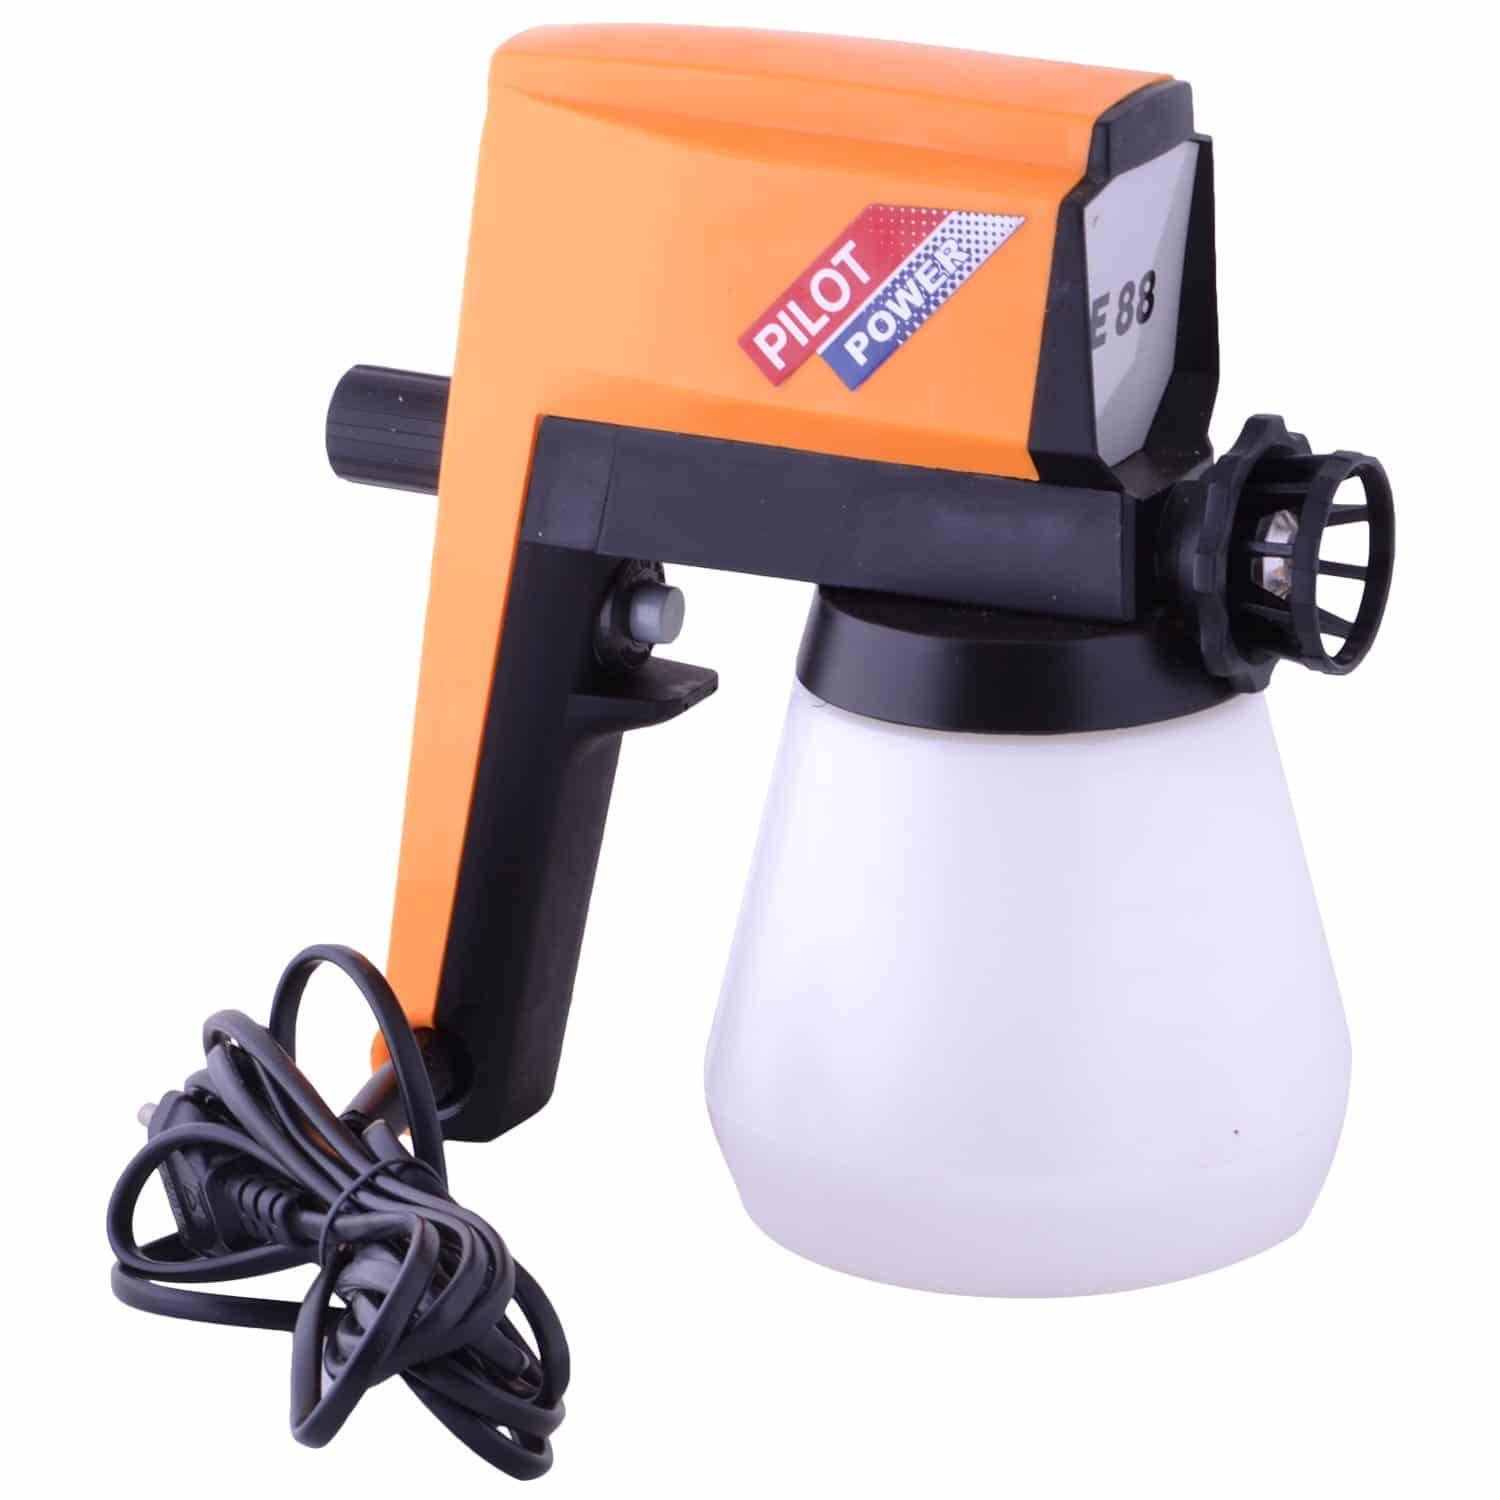 Product Pilot E88 Airless Electric Spray Gun New - InchTools.com image